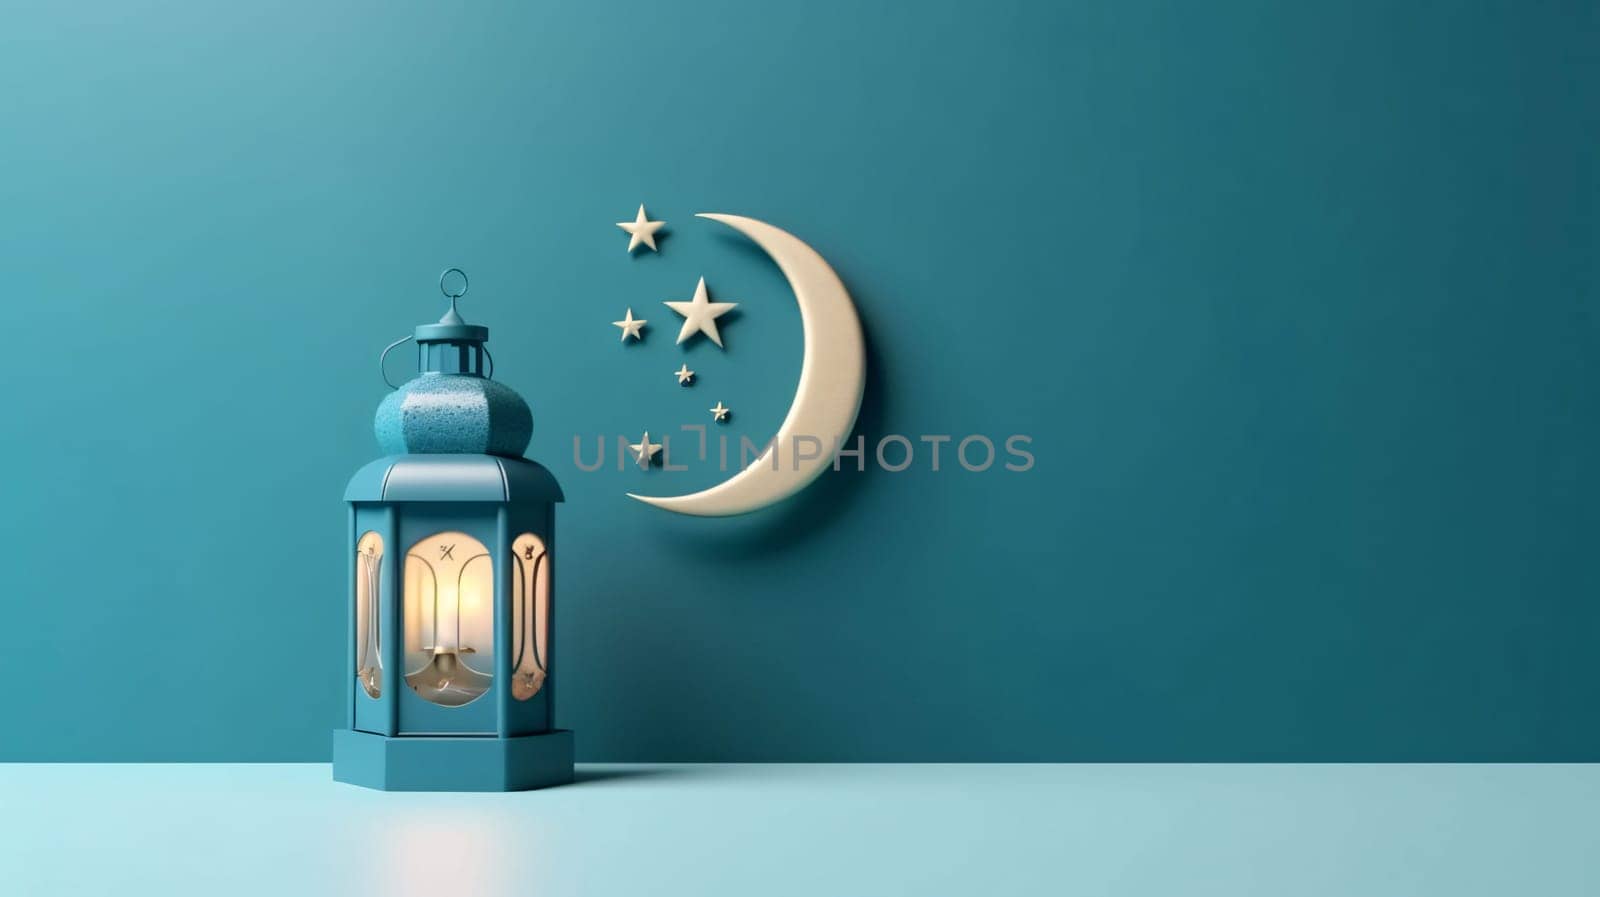 Ramadan Kareem lantern with crescent moon and stars on blue wall background by ThemesS